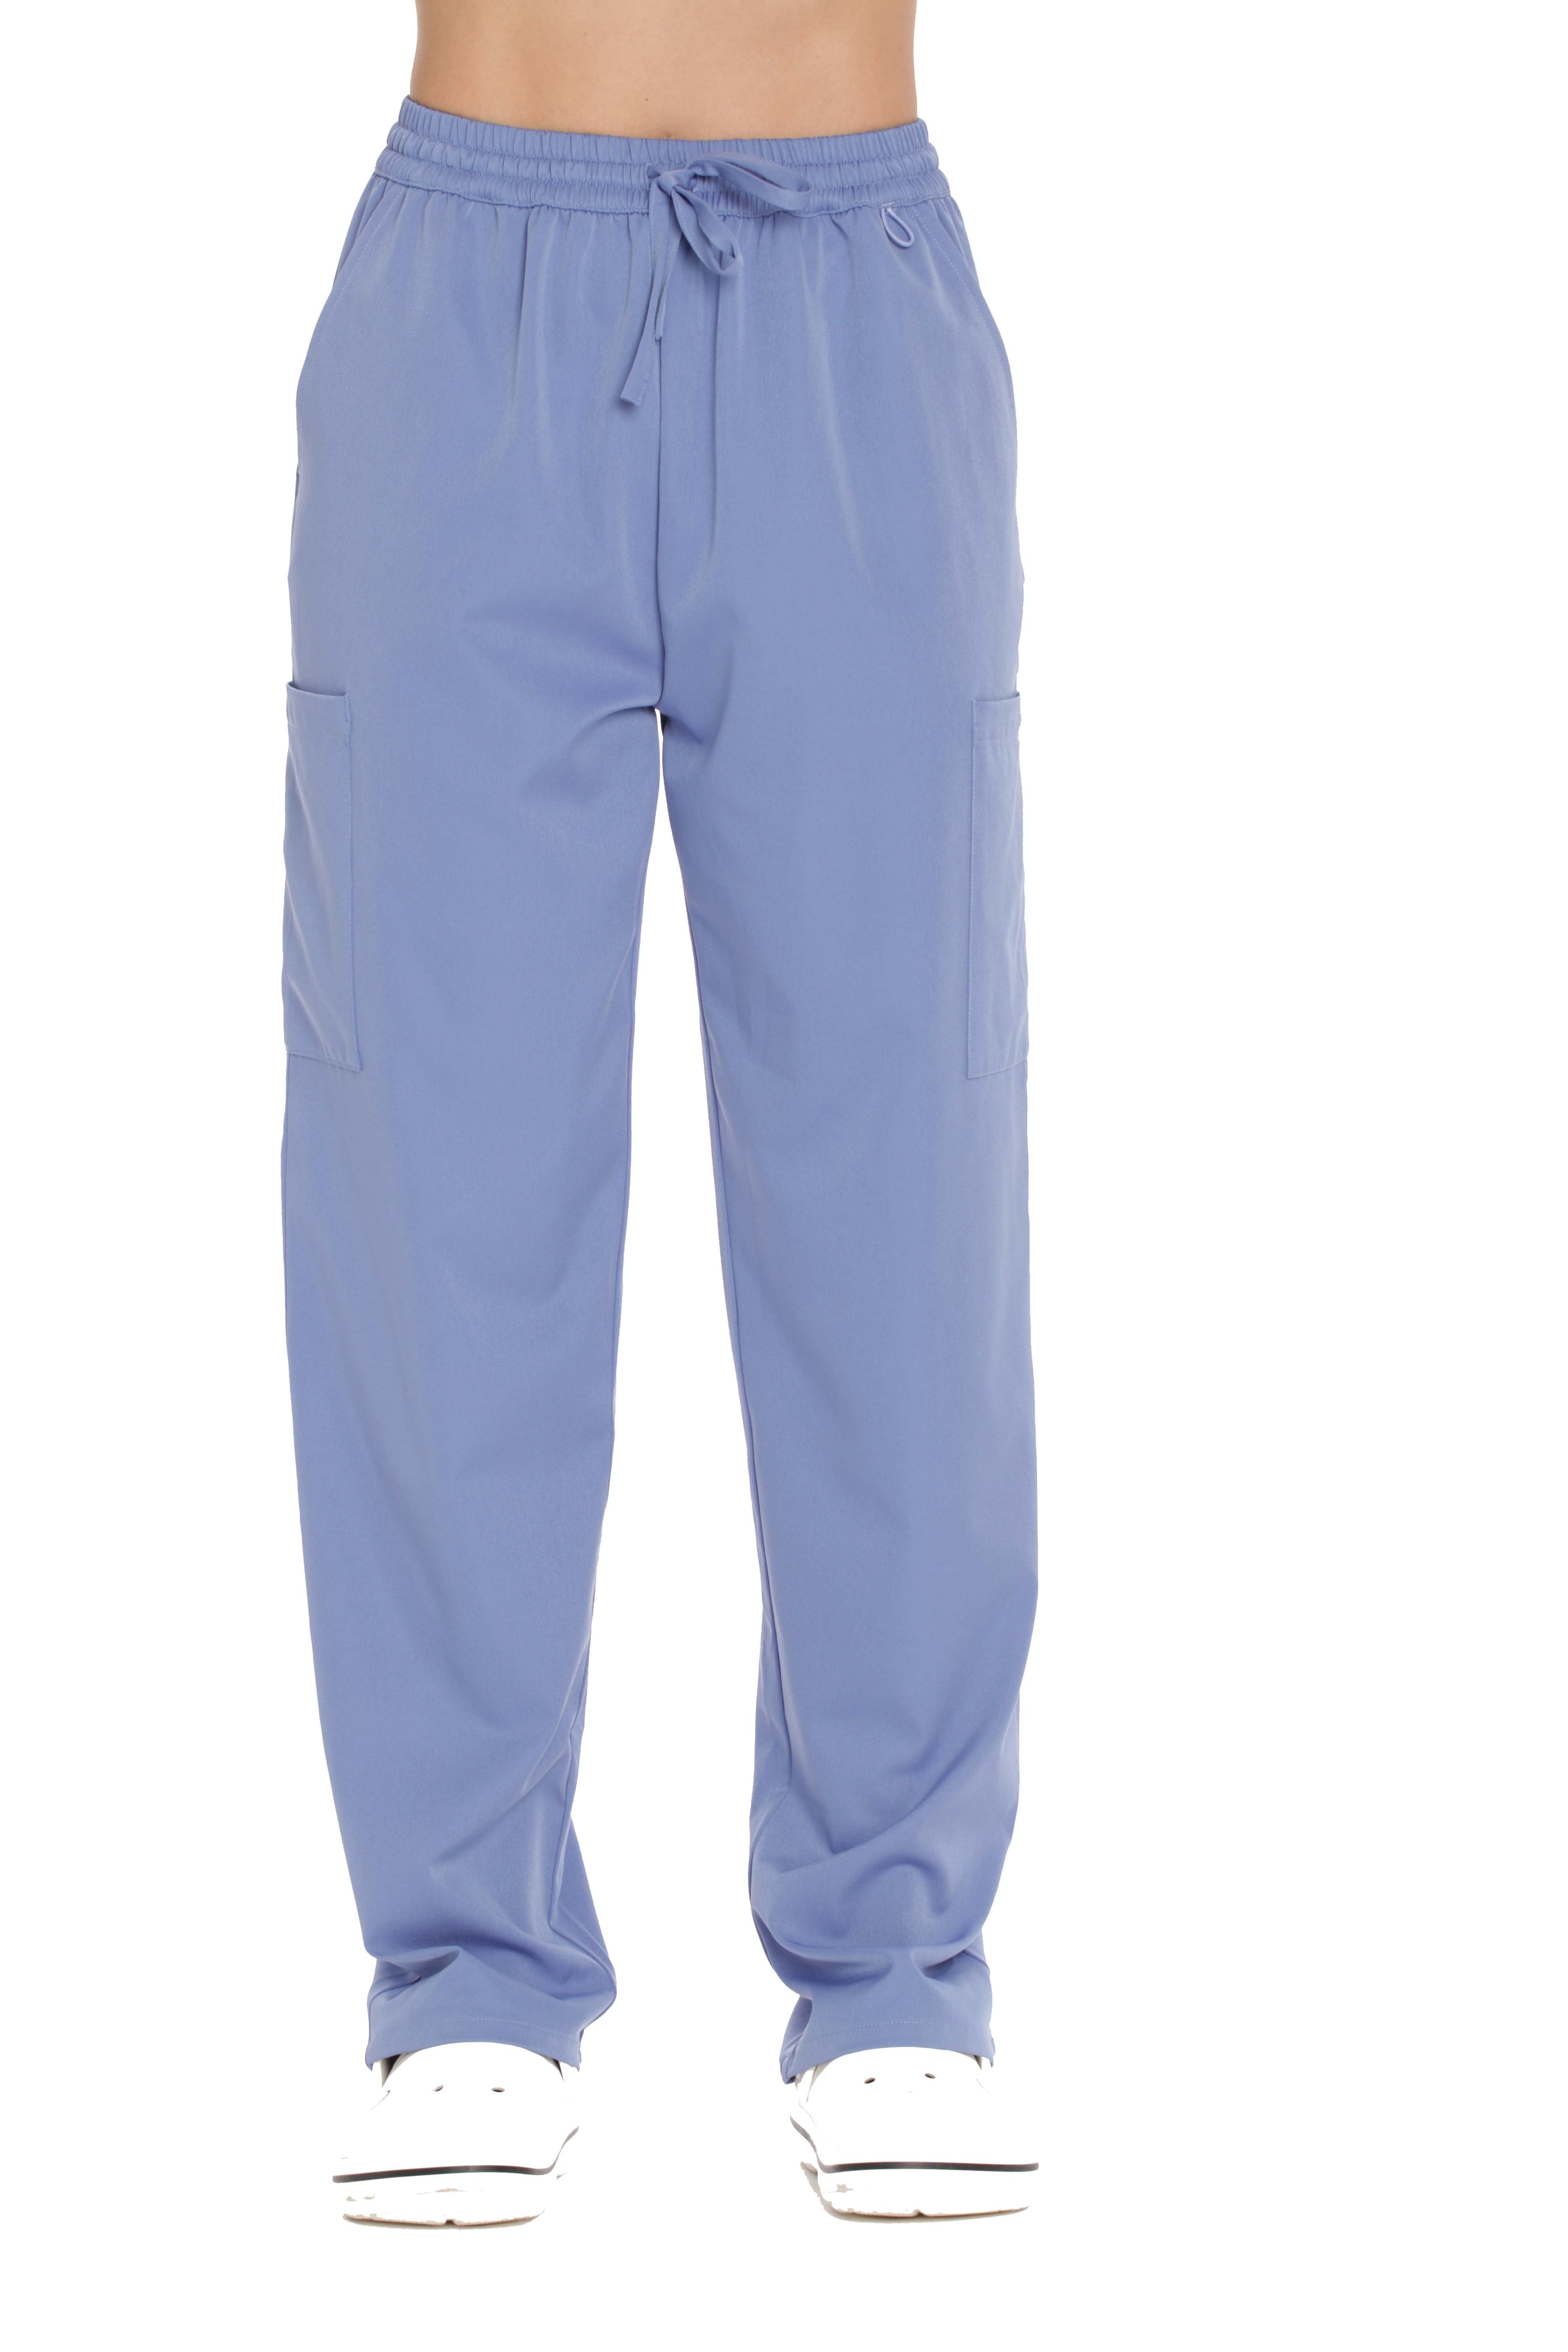 Just Love - Just Love Stretch Solid Scrub Pants for Women 6825-NVY-XS ...